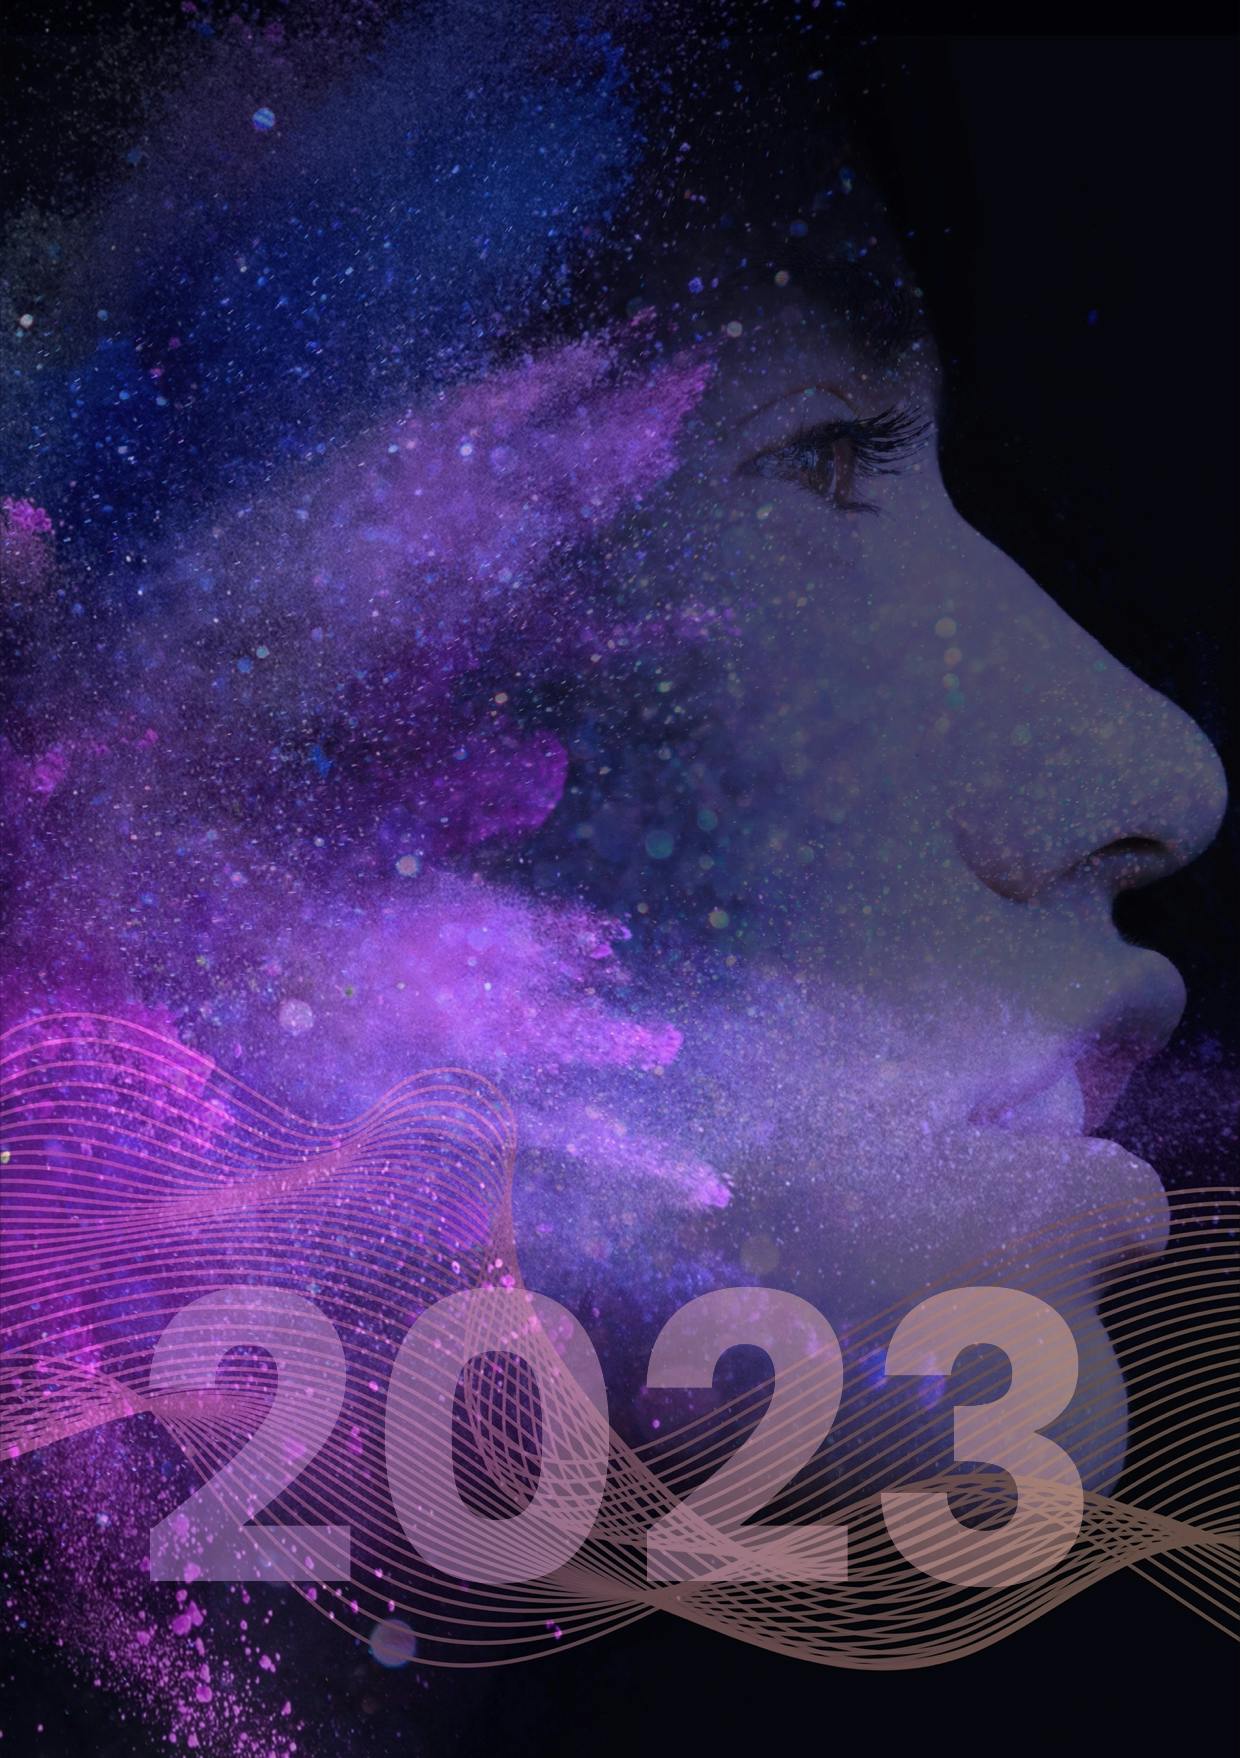 Trend Confirmations & Predictions for 2023